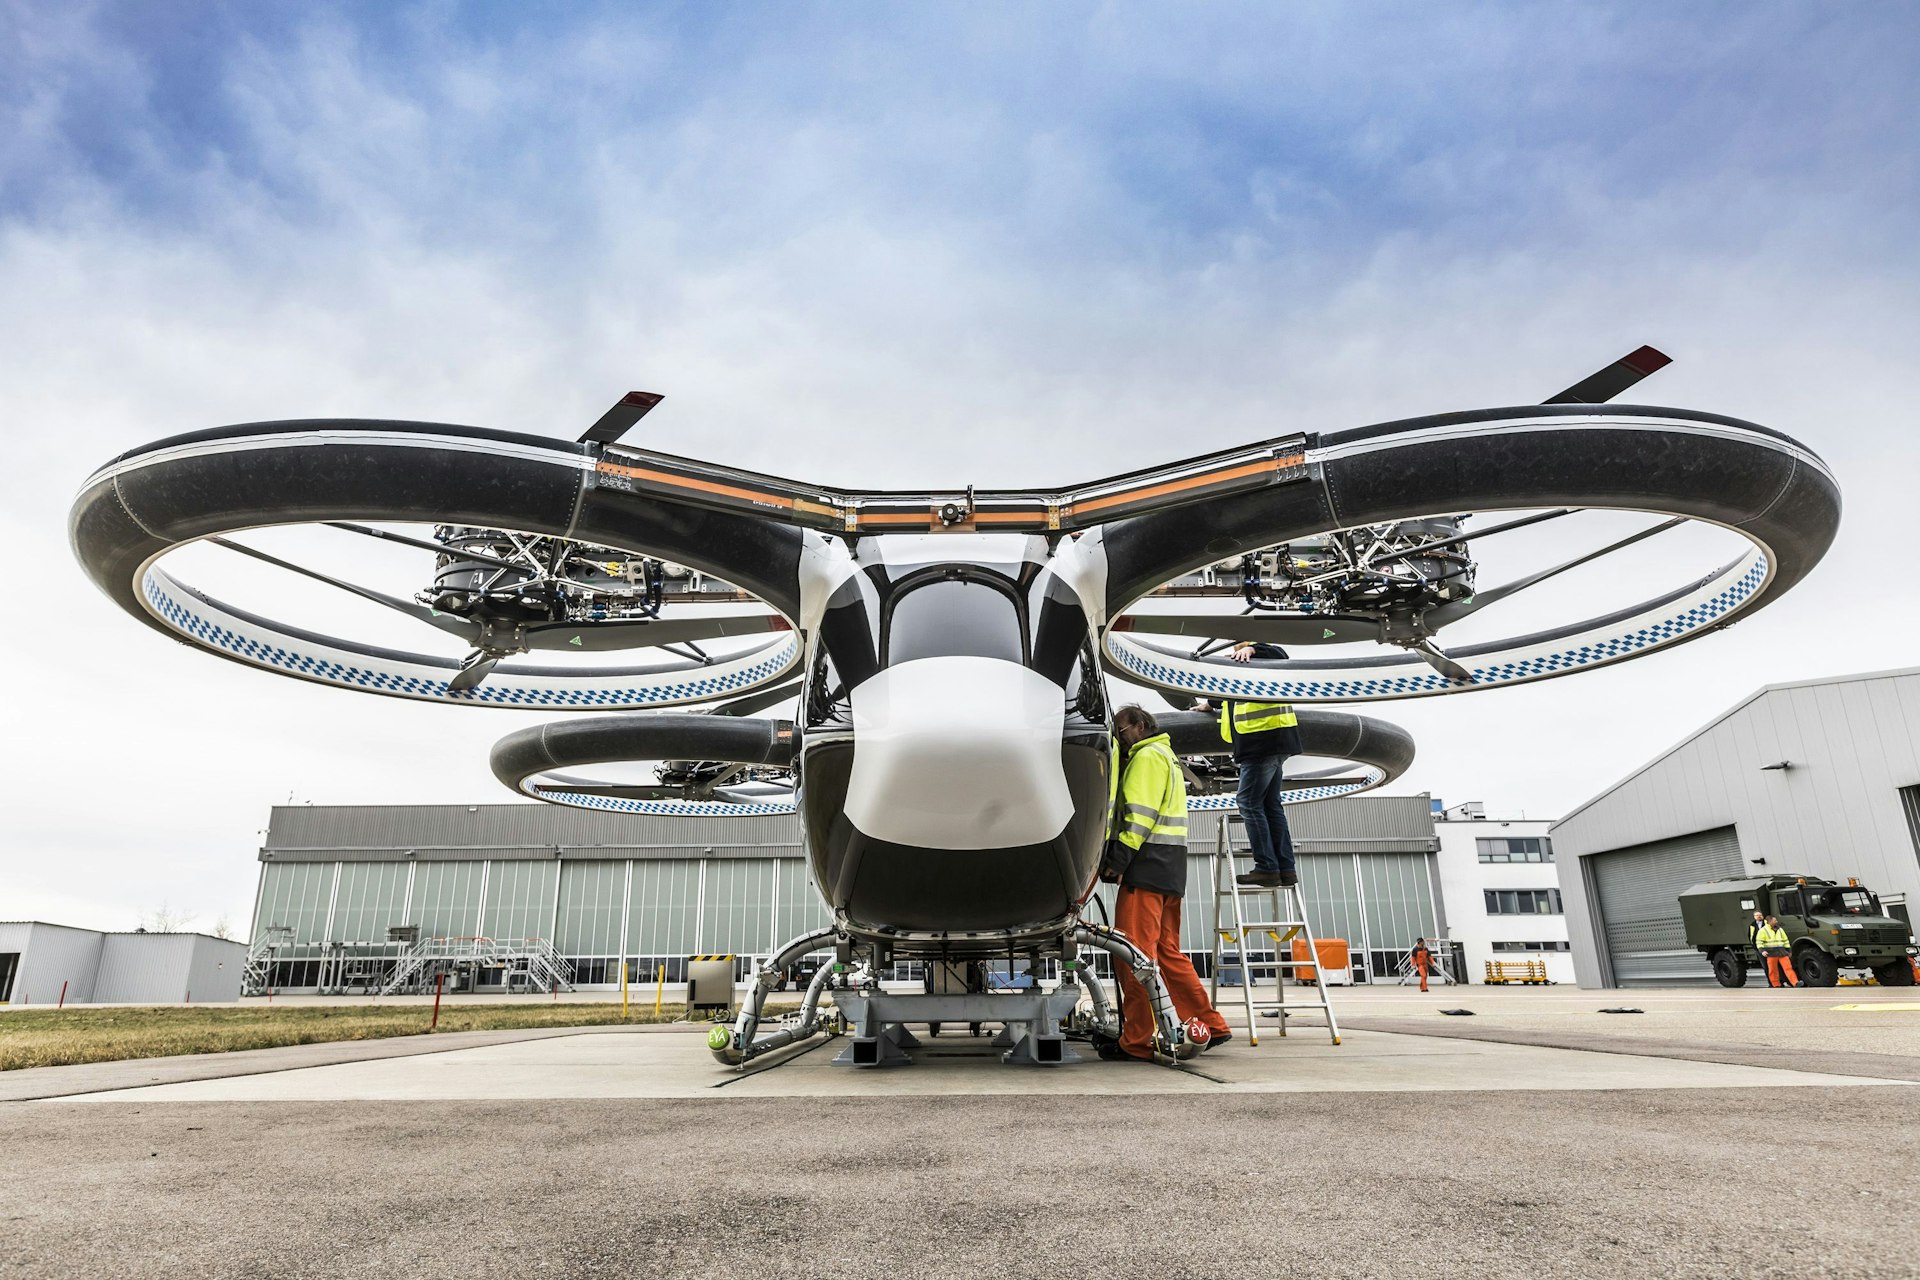 Airbus' electric flying taxi